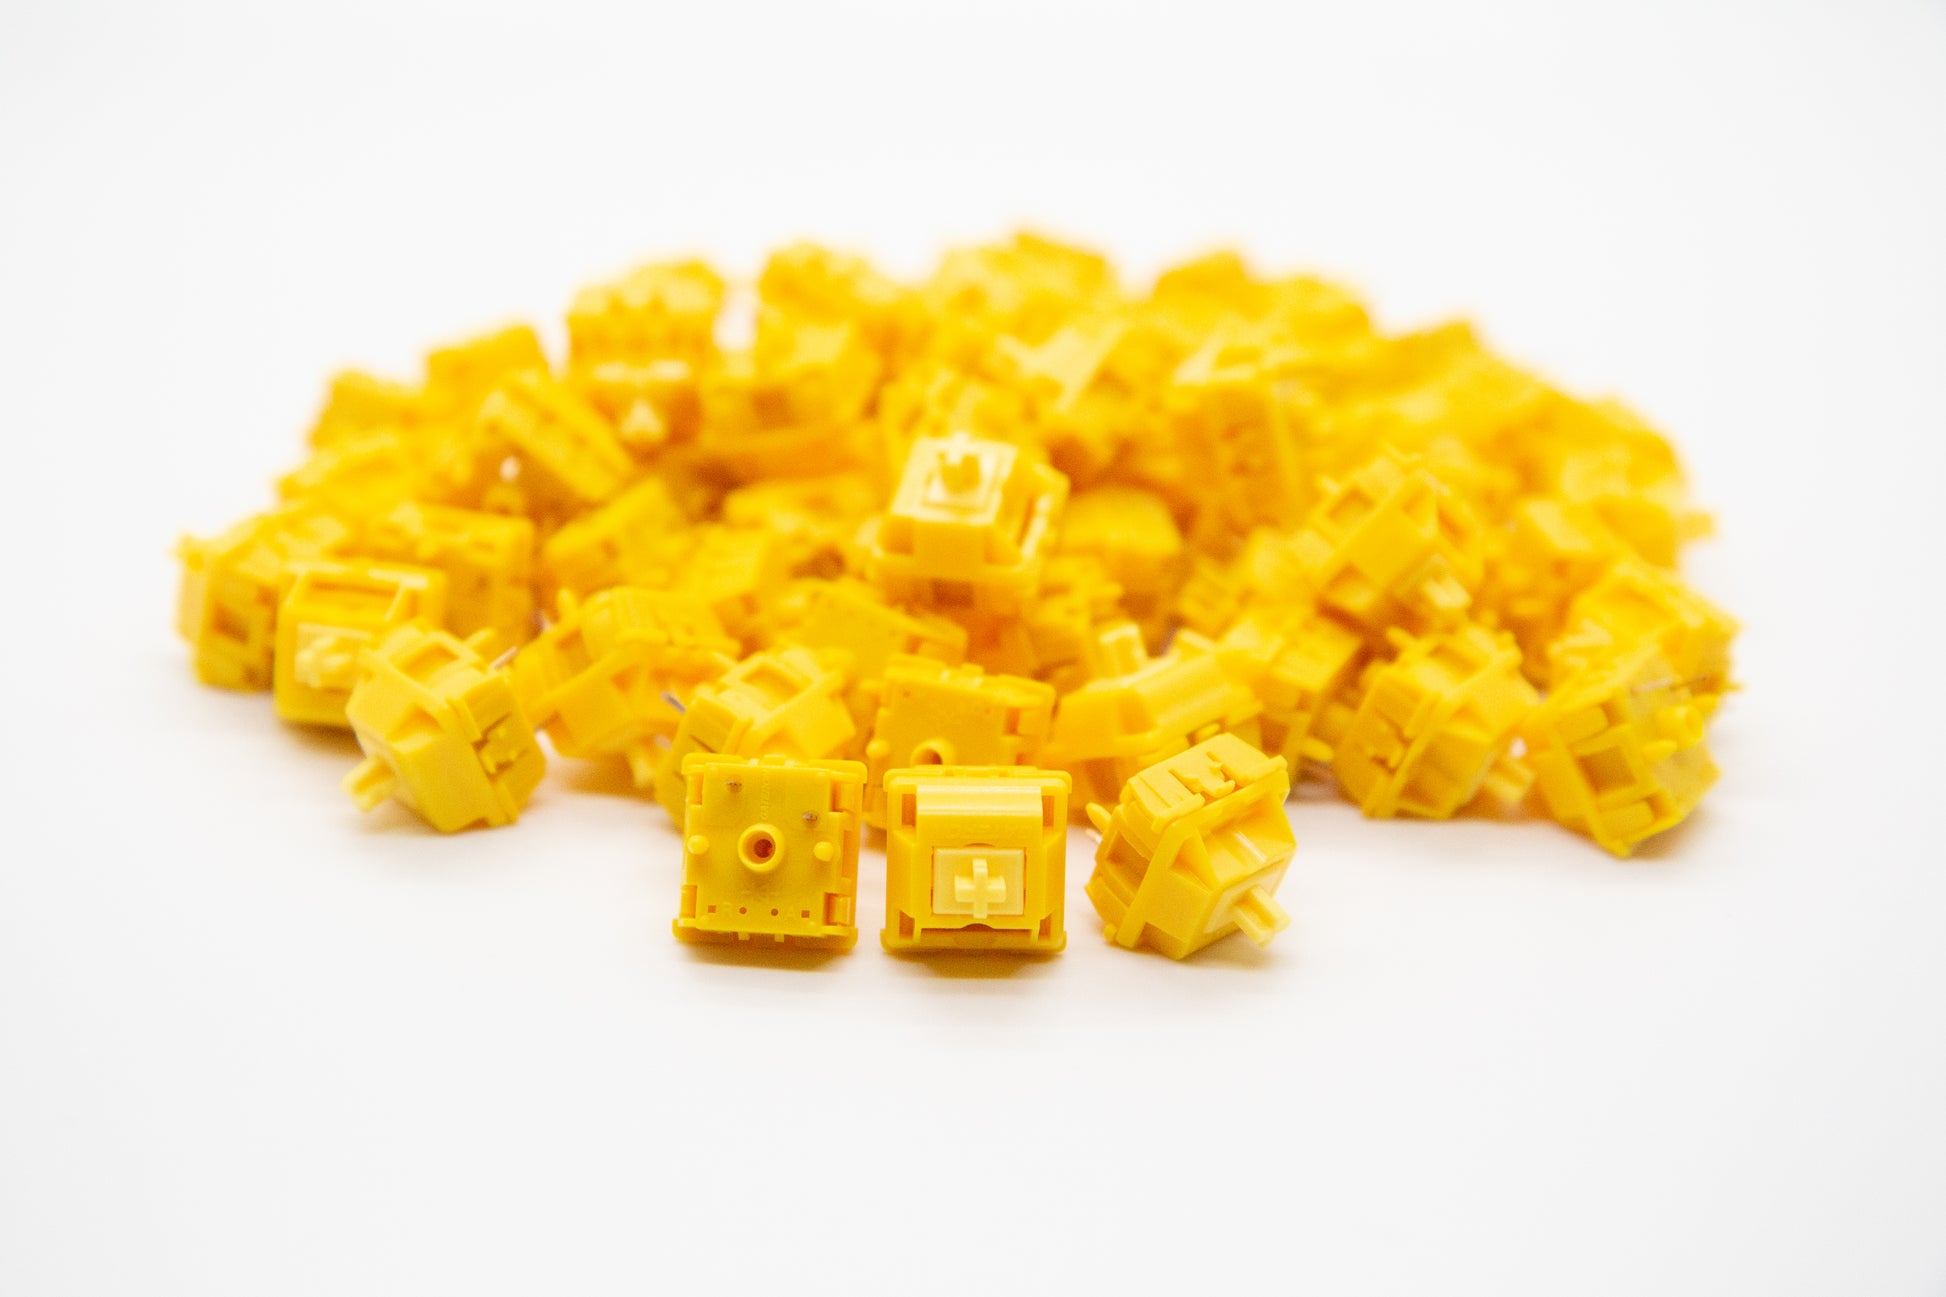 Close-up shot of a pile of Gateron Cap-Yellow mechanical keyboard switches featuring yellow housing and yellow stems